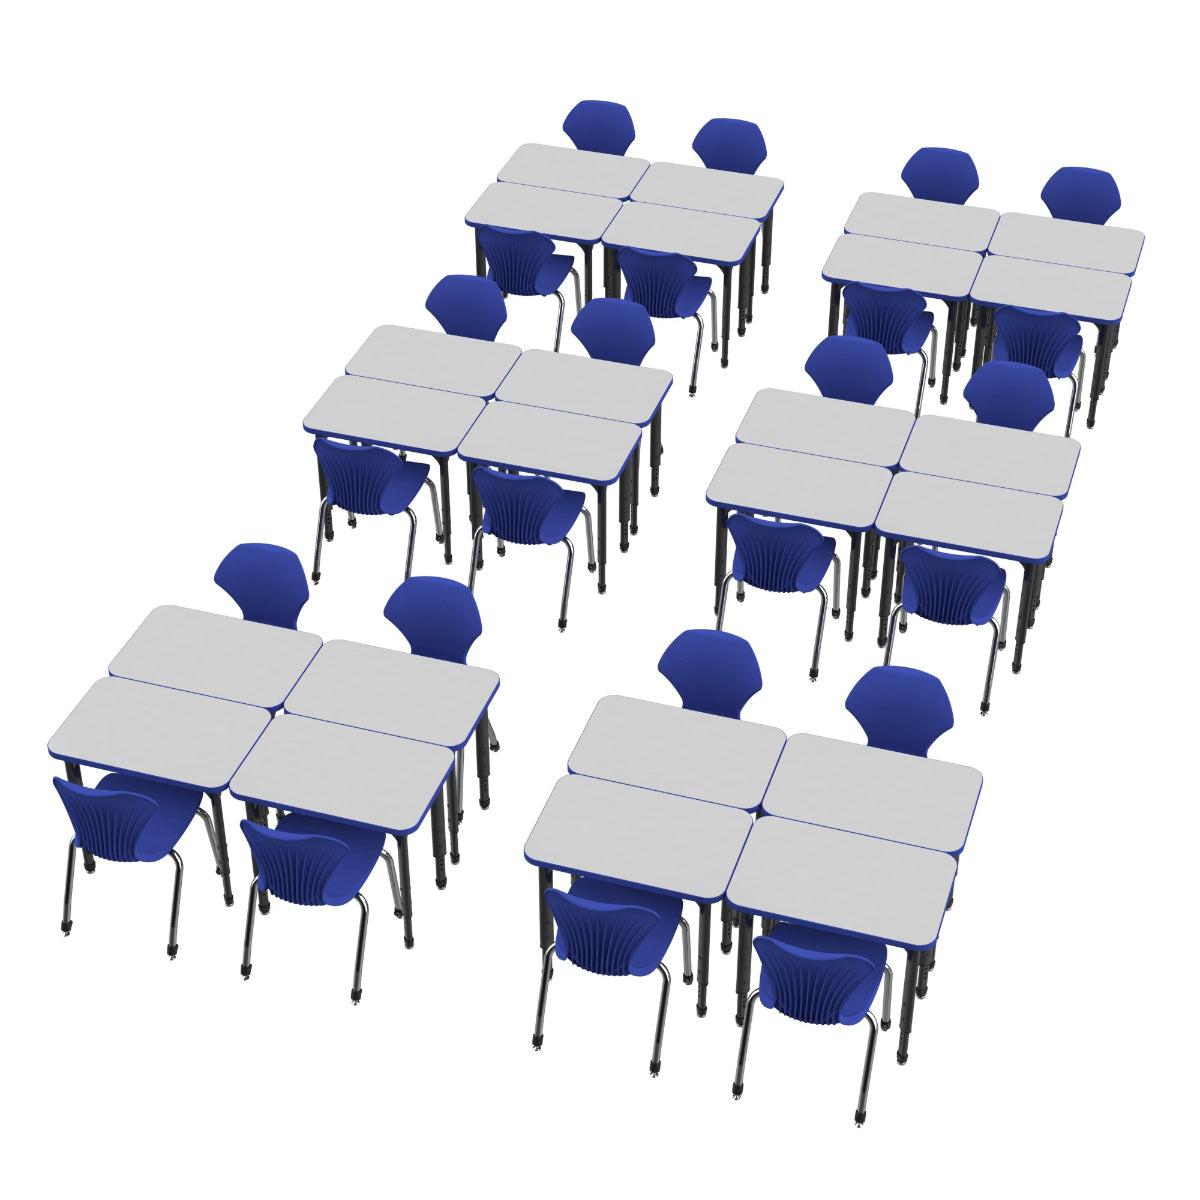 Apex Dry Erase Classroom Desk and Chair Package, 24 Rectangle Collaborative Student Desks, 20" x 36", with 24 Apex Stack Chairs